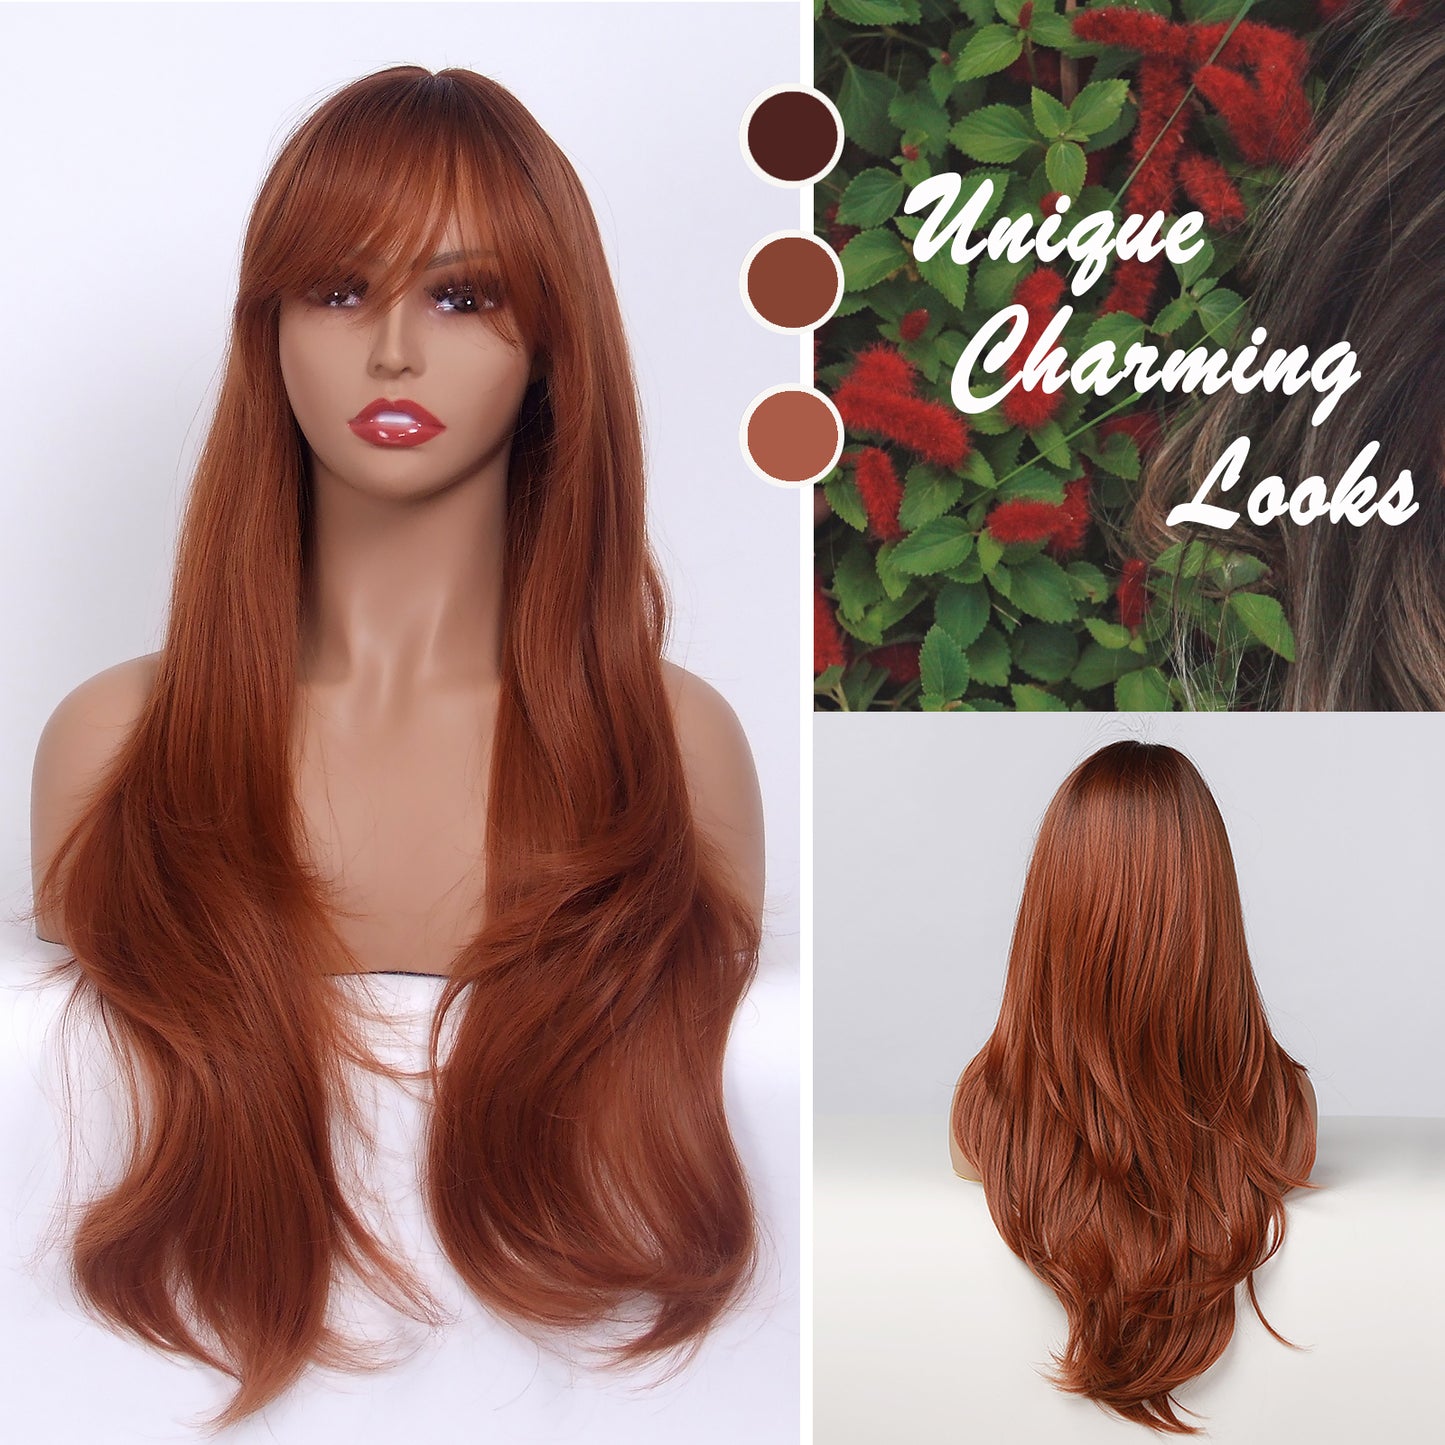 LINGDORA Long Ginger Orange Wavy Wig with Bangs for Women Natural Curly Hair Synthetic Silky